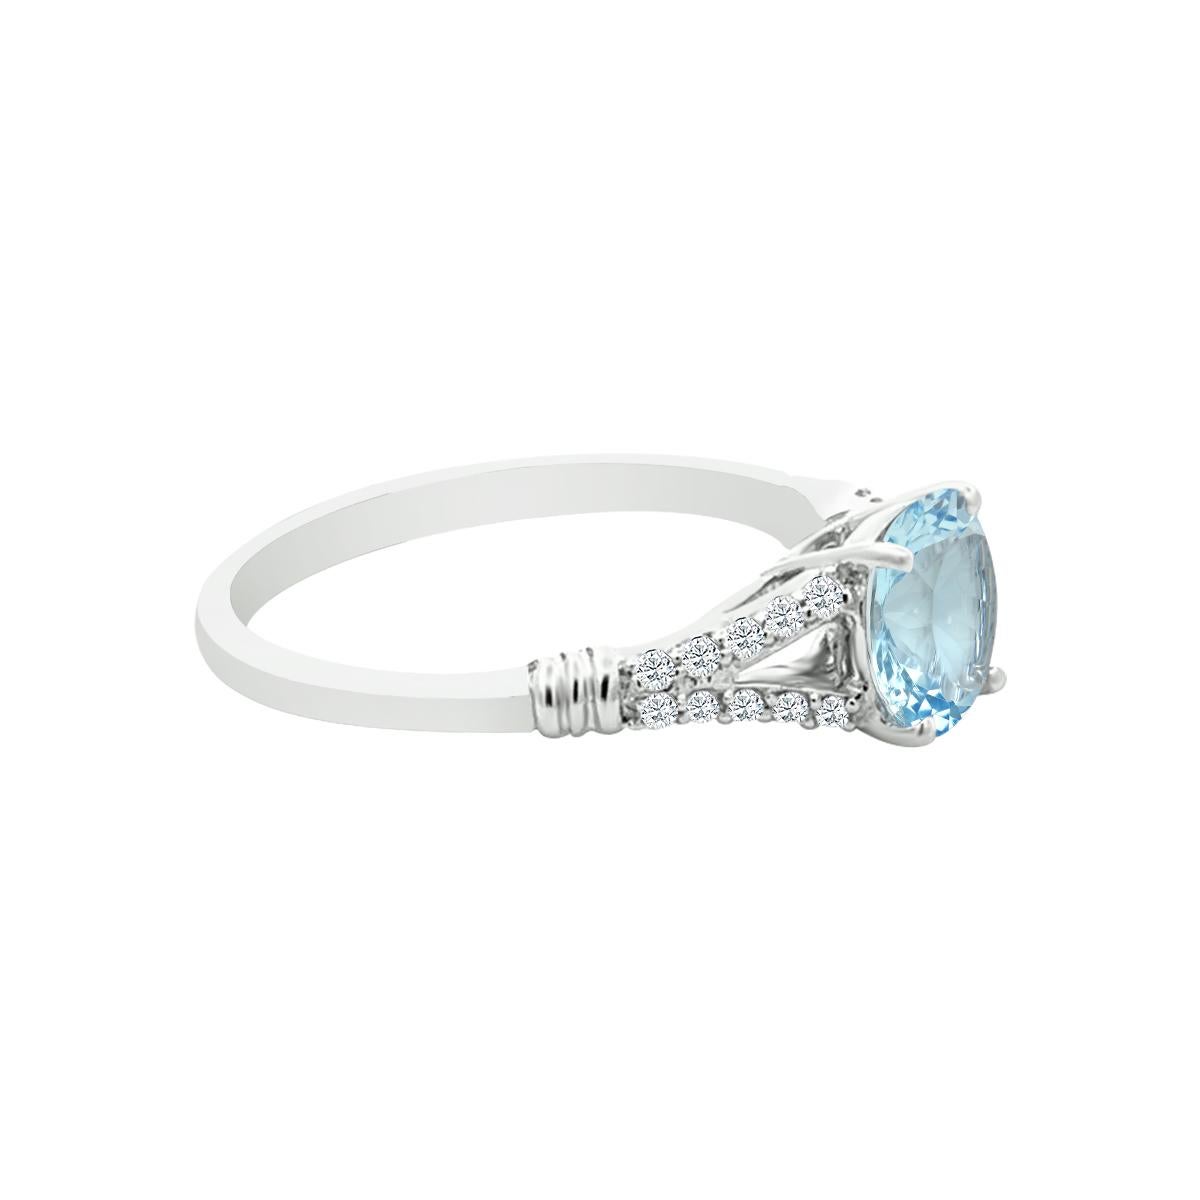 Modern 14K White Gold 1.06cts Aquamarine and Diamond Ring, Style# R2257AQ 22060/6 For Sale